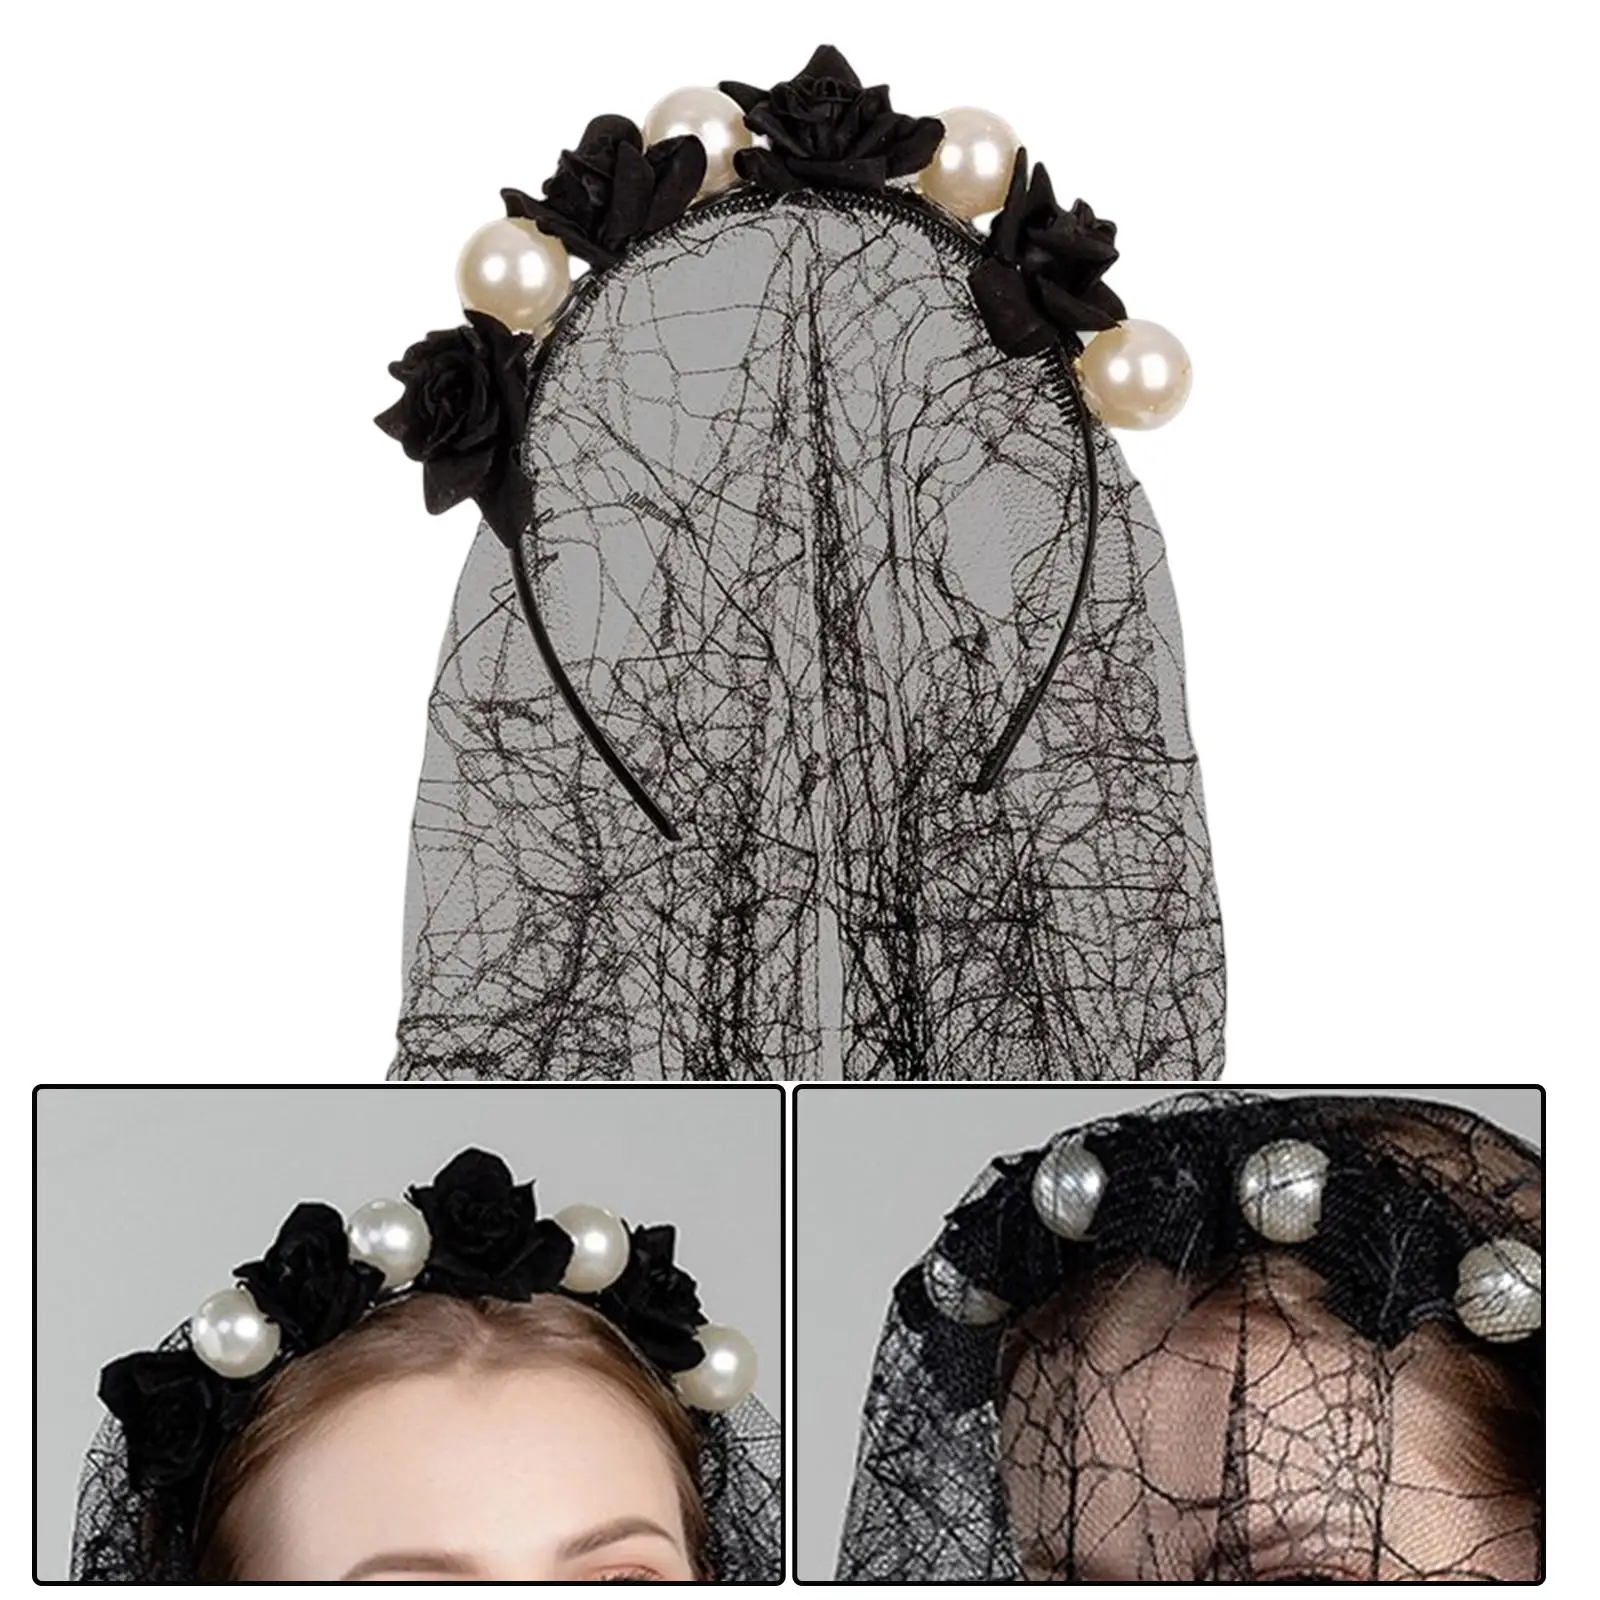 Lace Halloween Veil Flower Headband Bridal Costume Accessory Gothic Headpiece for Cosplay Festival Fancy Dress Party Girls